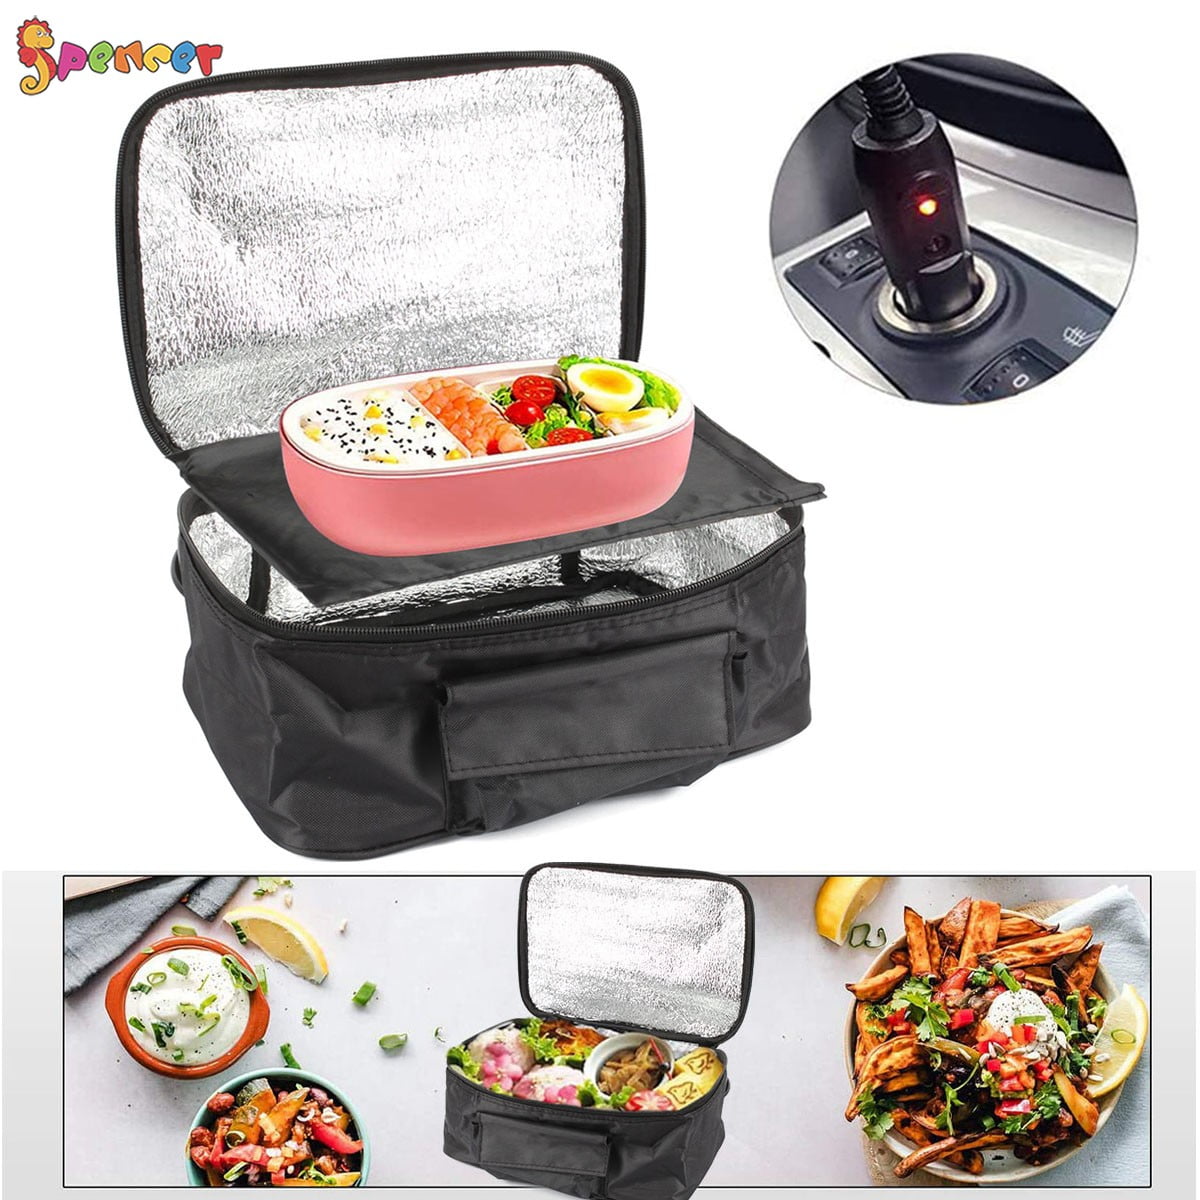 Fashion 12V Car Electric Lunch Box Mini Hot Food Heating Bag Portable Container 